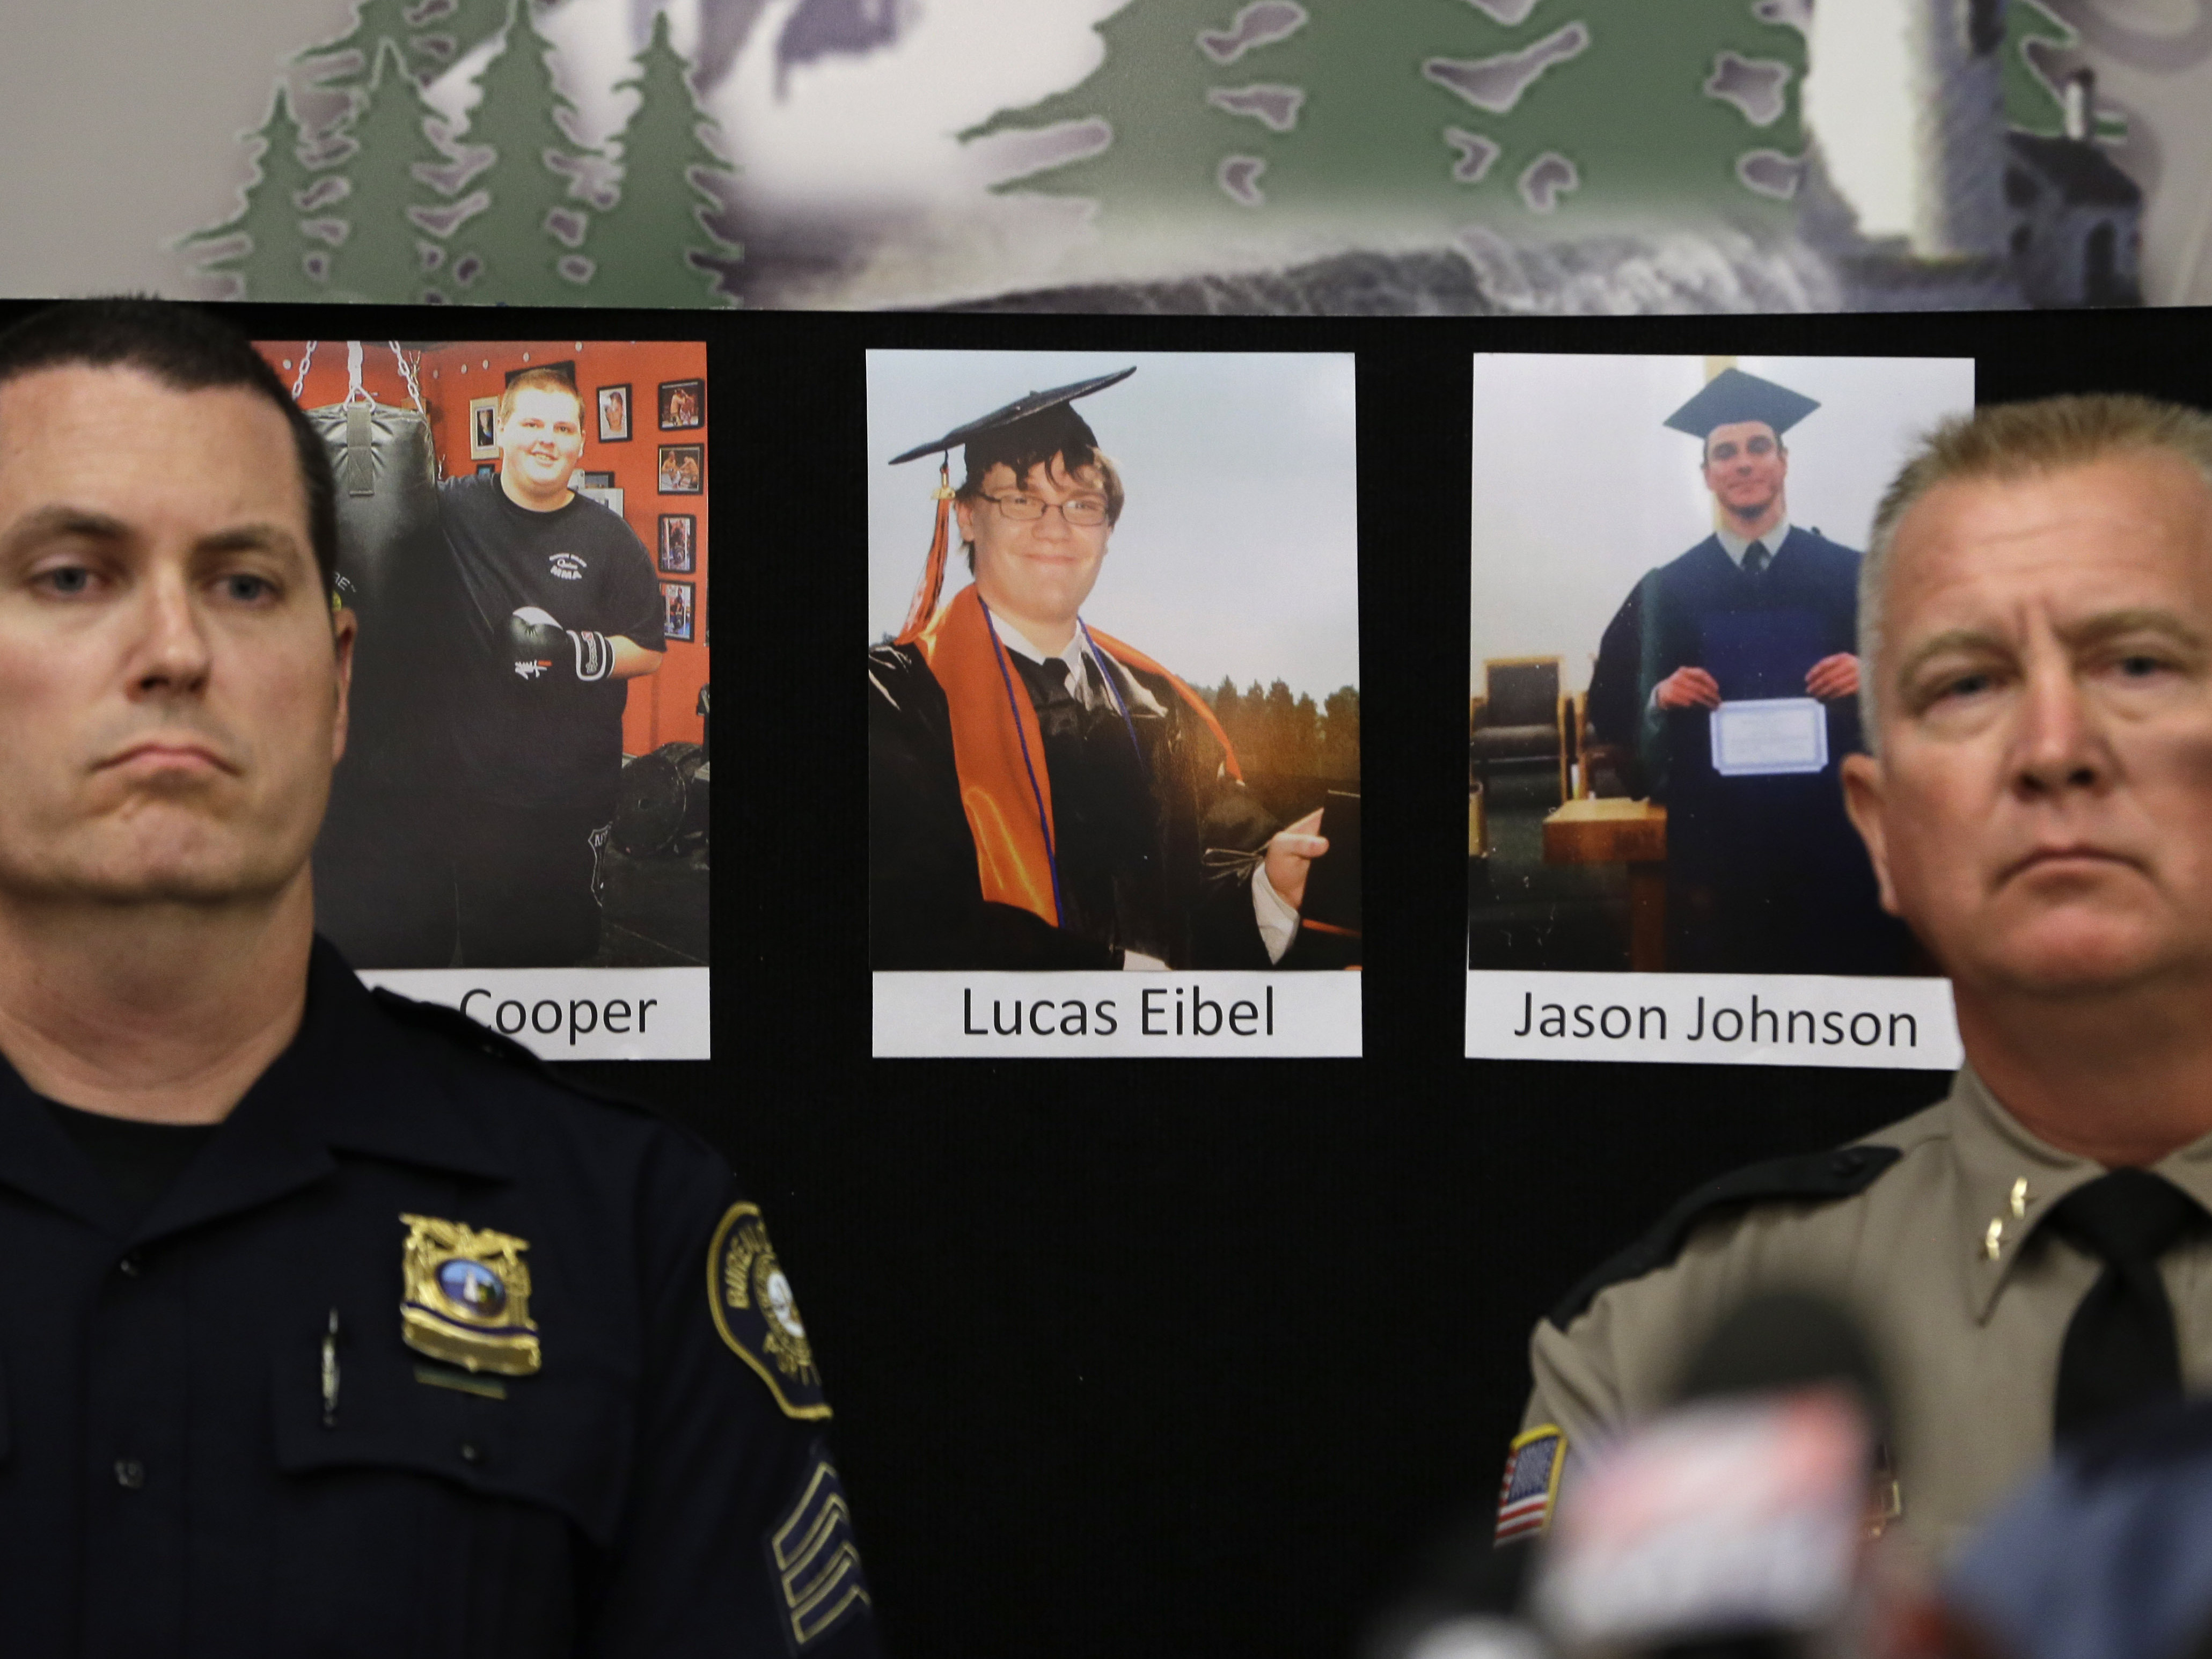 Photos of victims of the mass shooting at Umpqua Community College in Roseburg, Ore., are displayed behind Portland Police Sgt. Peter Simpson (left) and Douglas County Sheriff John Hanlin. (Photo by Rich Pedroncelli/AP)